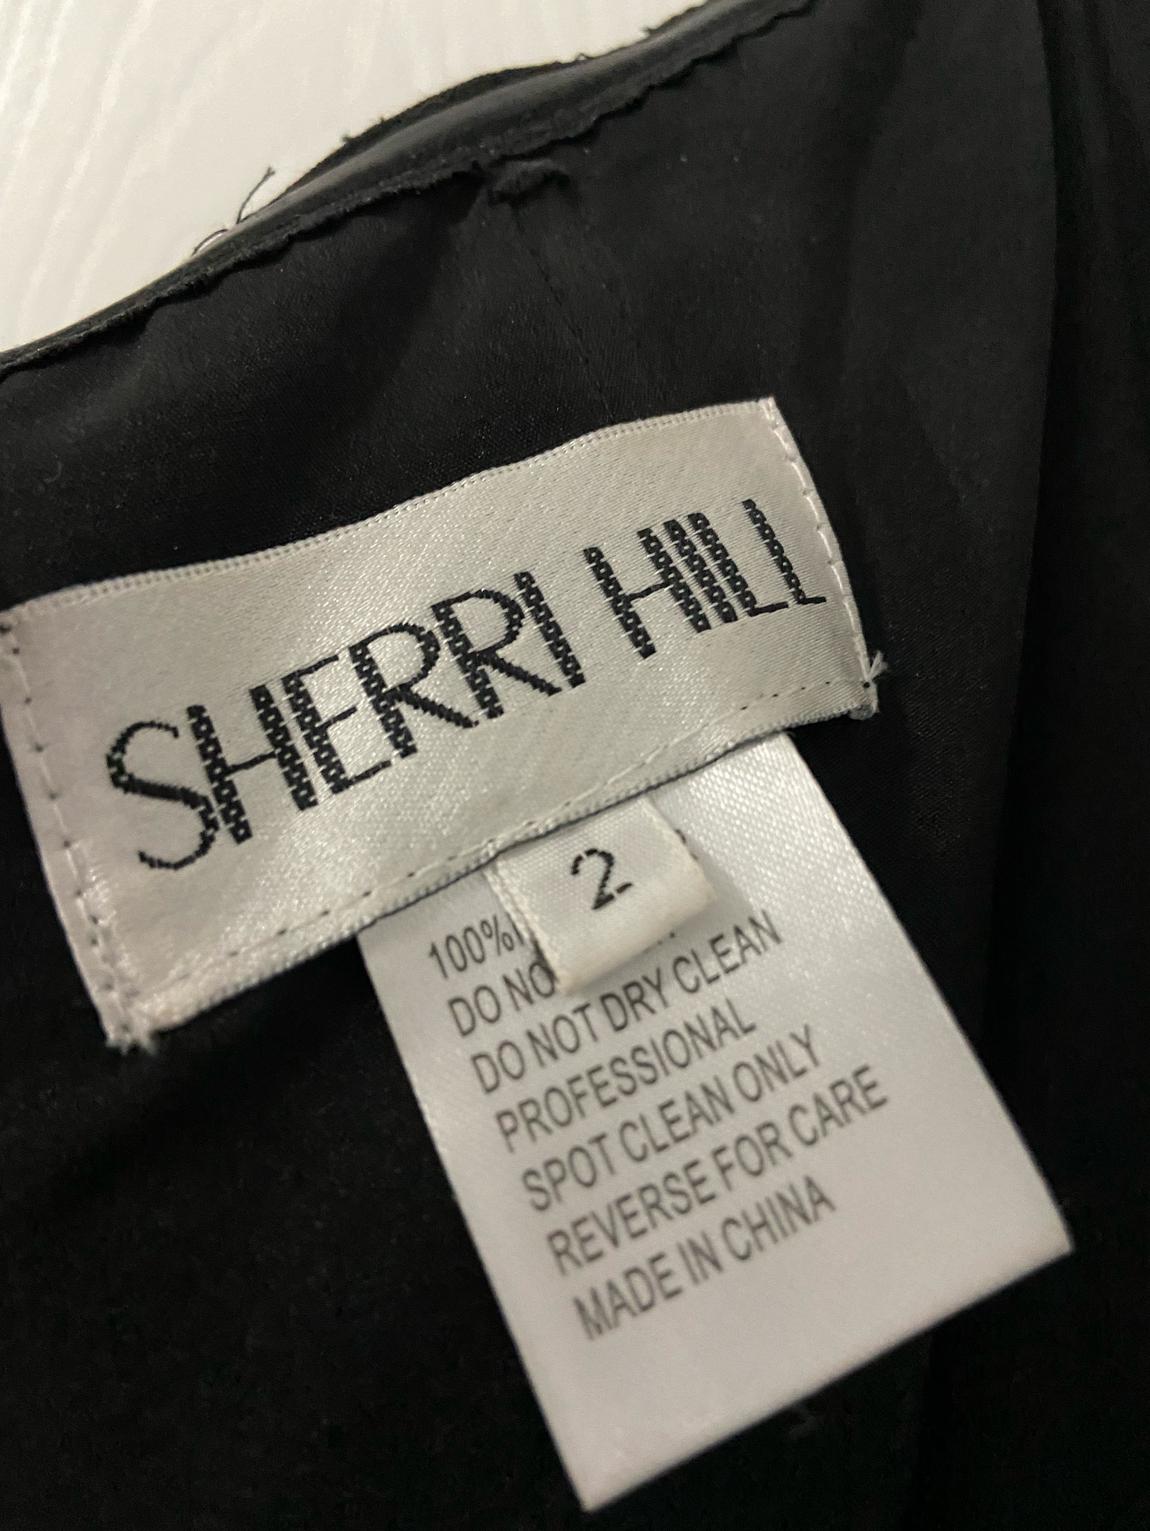 Sherri Hill Size 2 Prom Strapless Black Ball Gown on Queenly